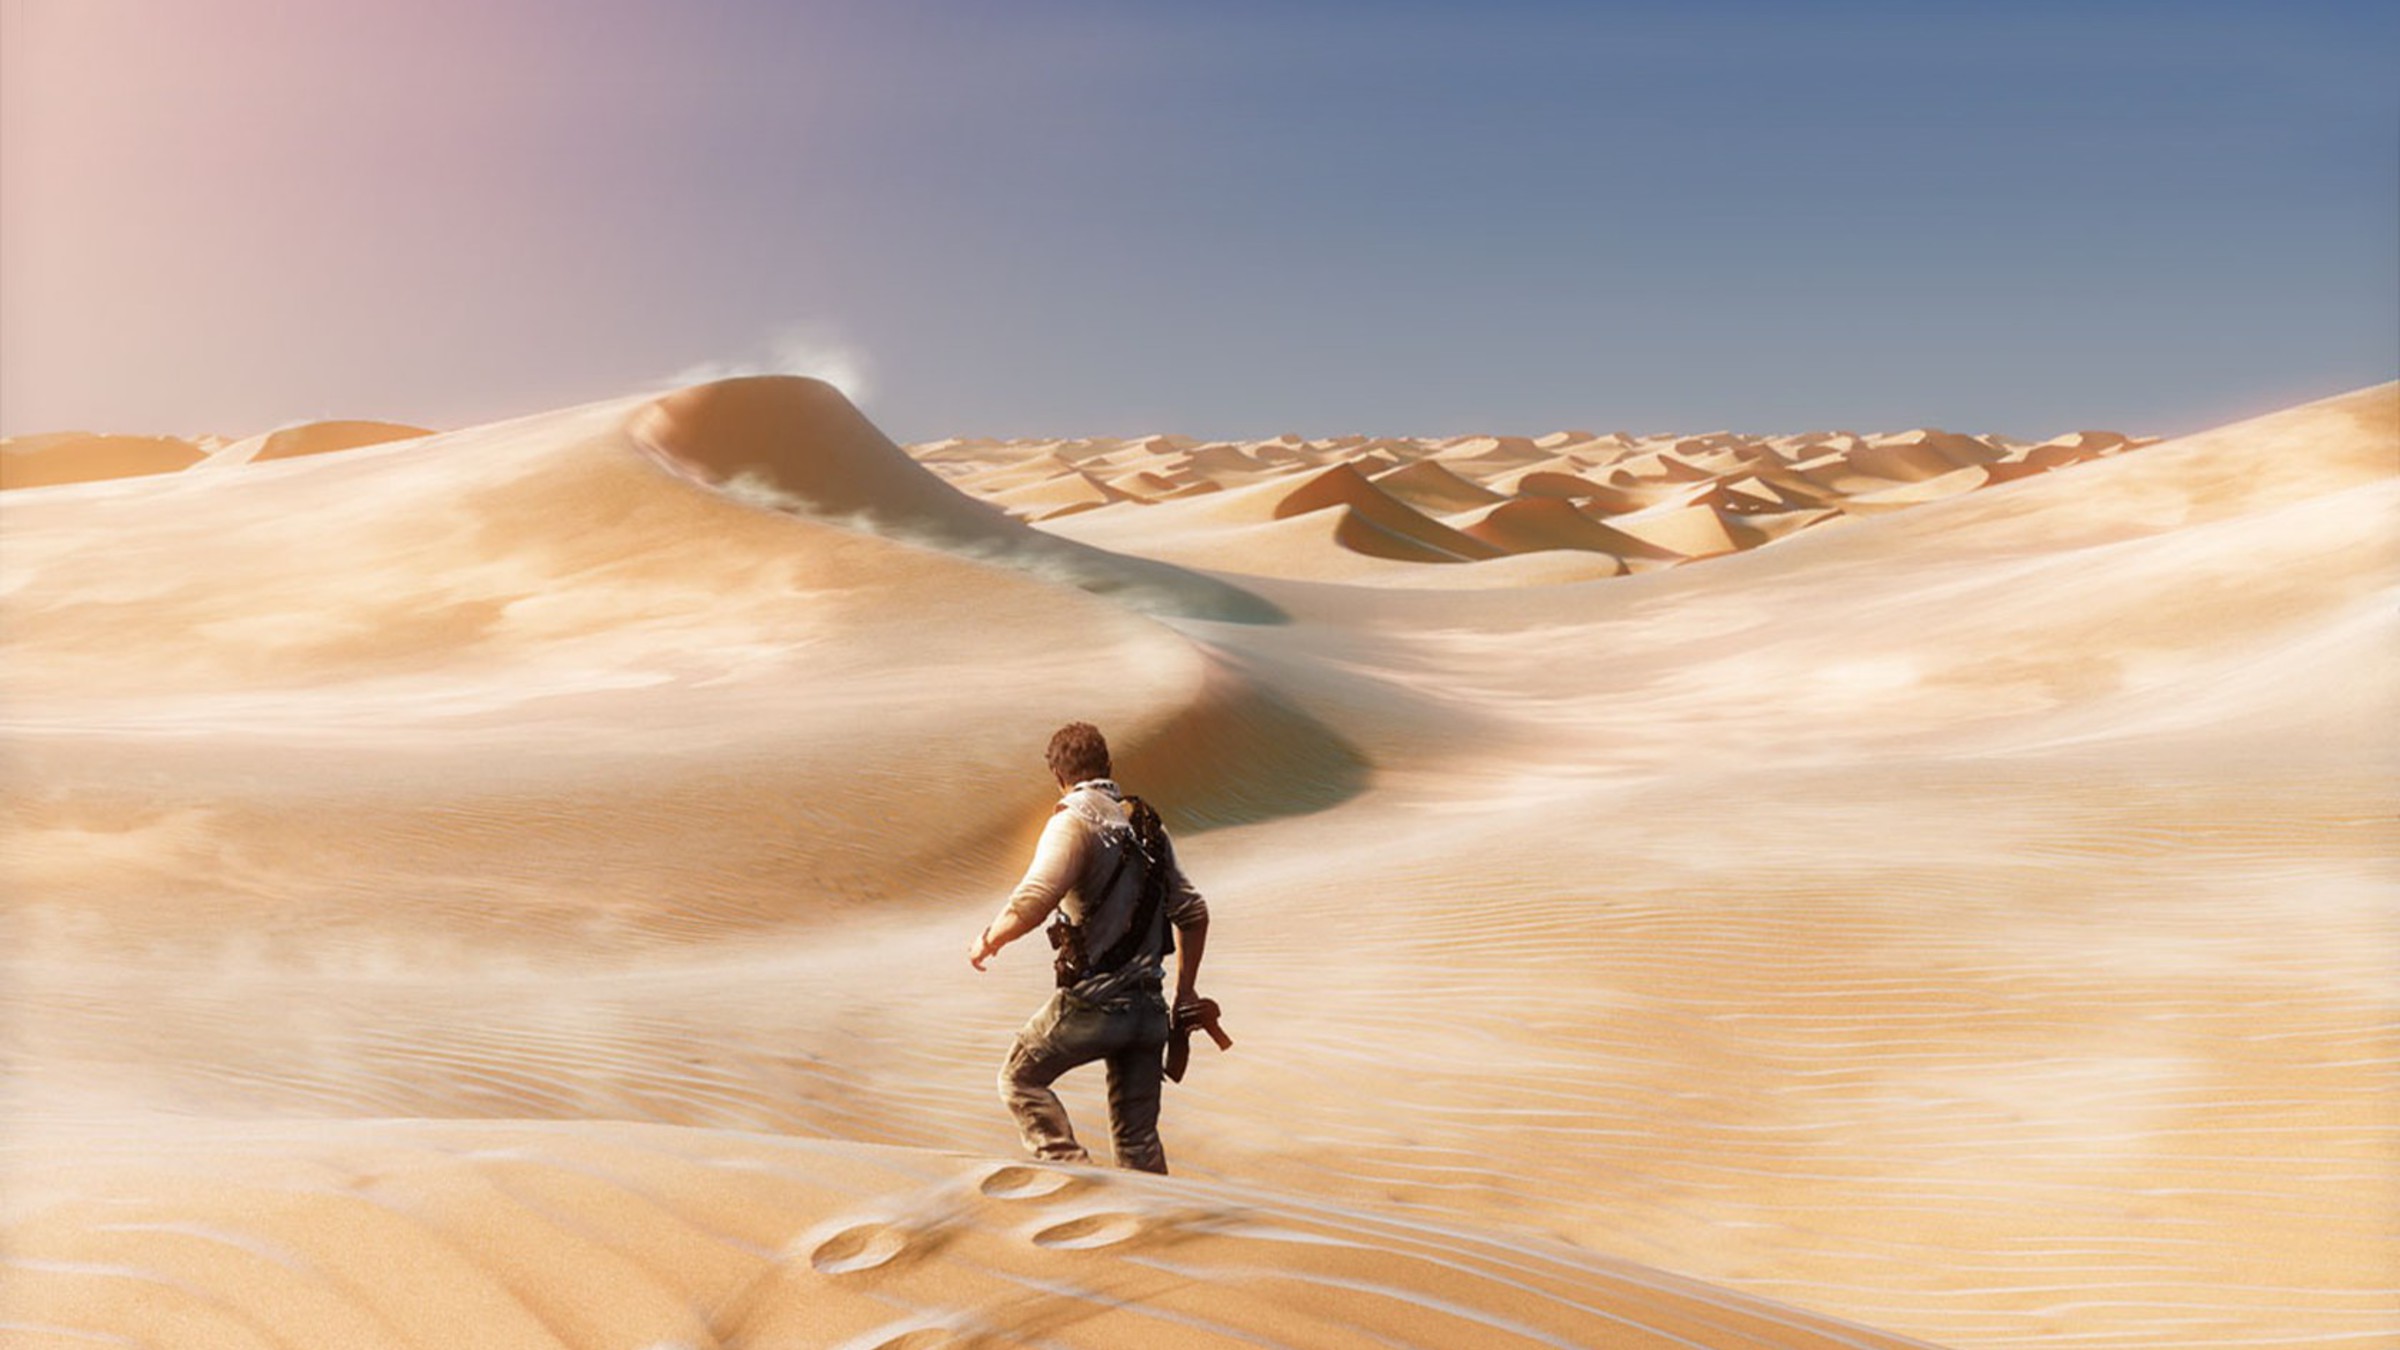 uncharted 3: drake's deception, video game, desert, uncharted